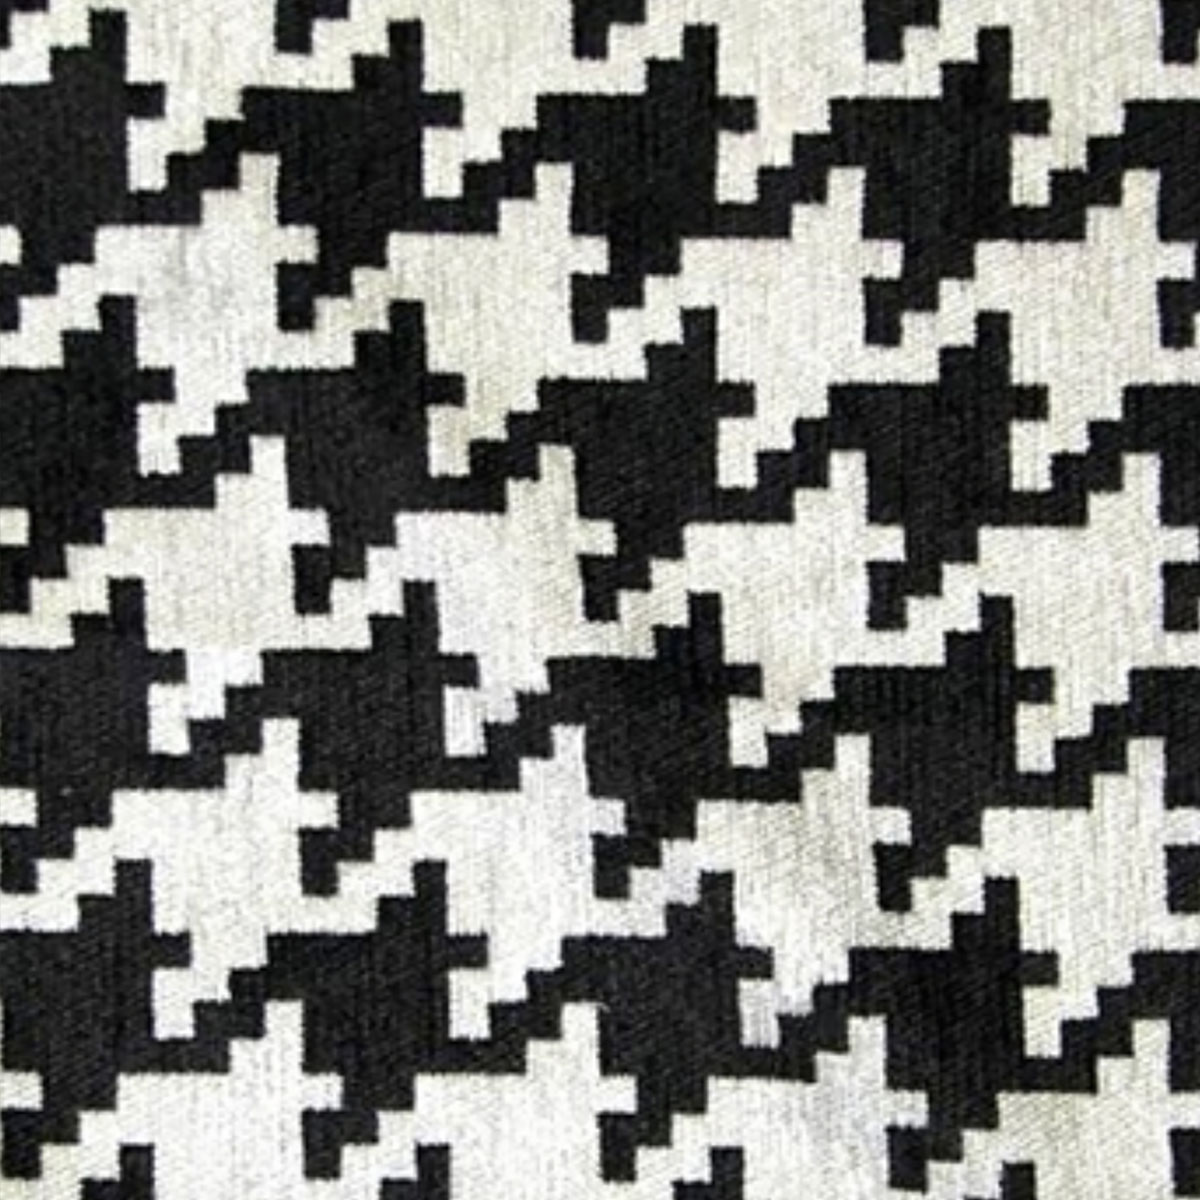 Fabric 24 - Houndstooth